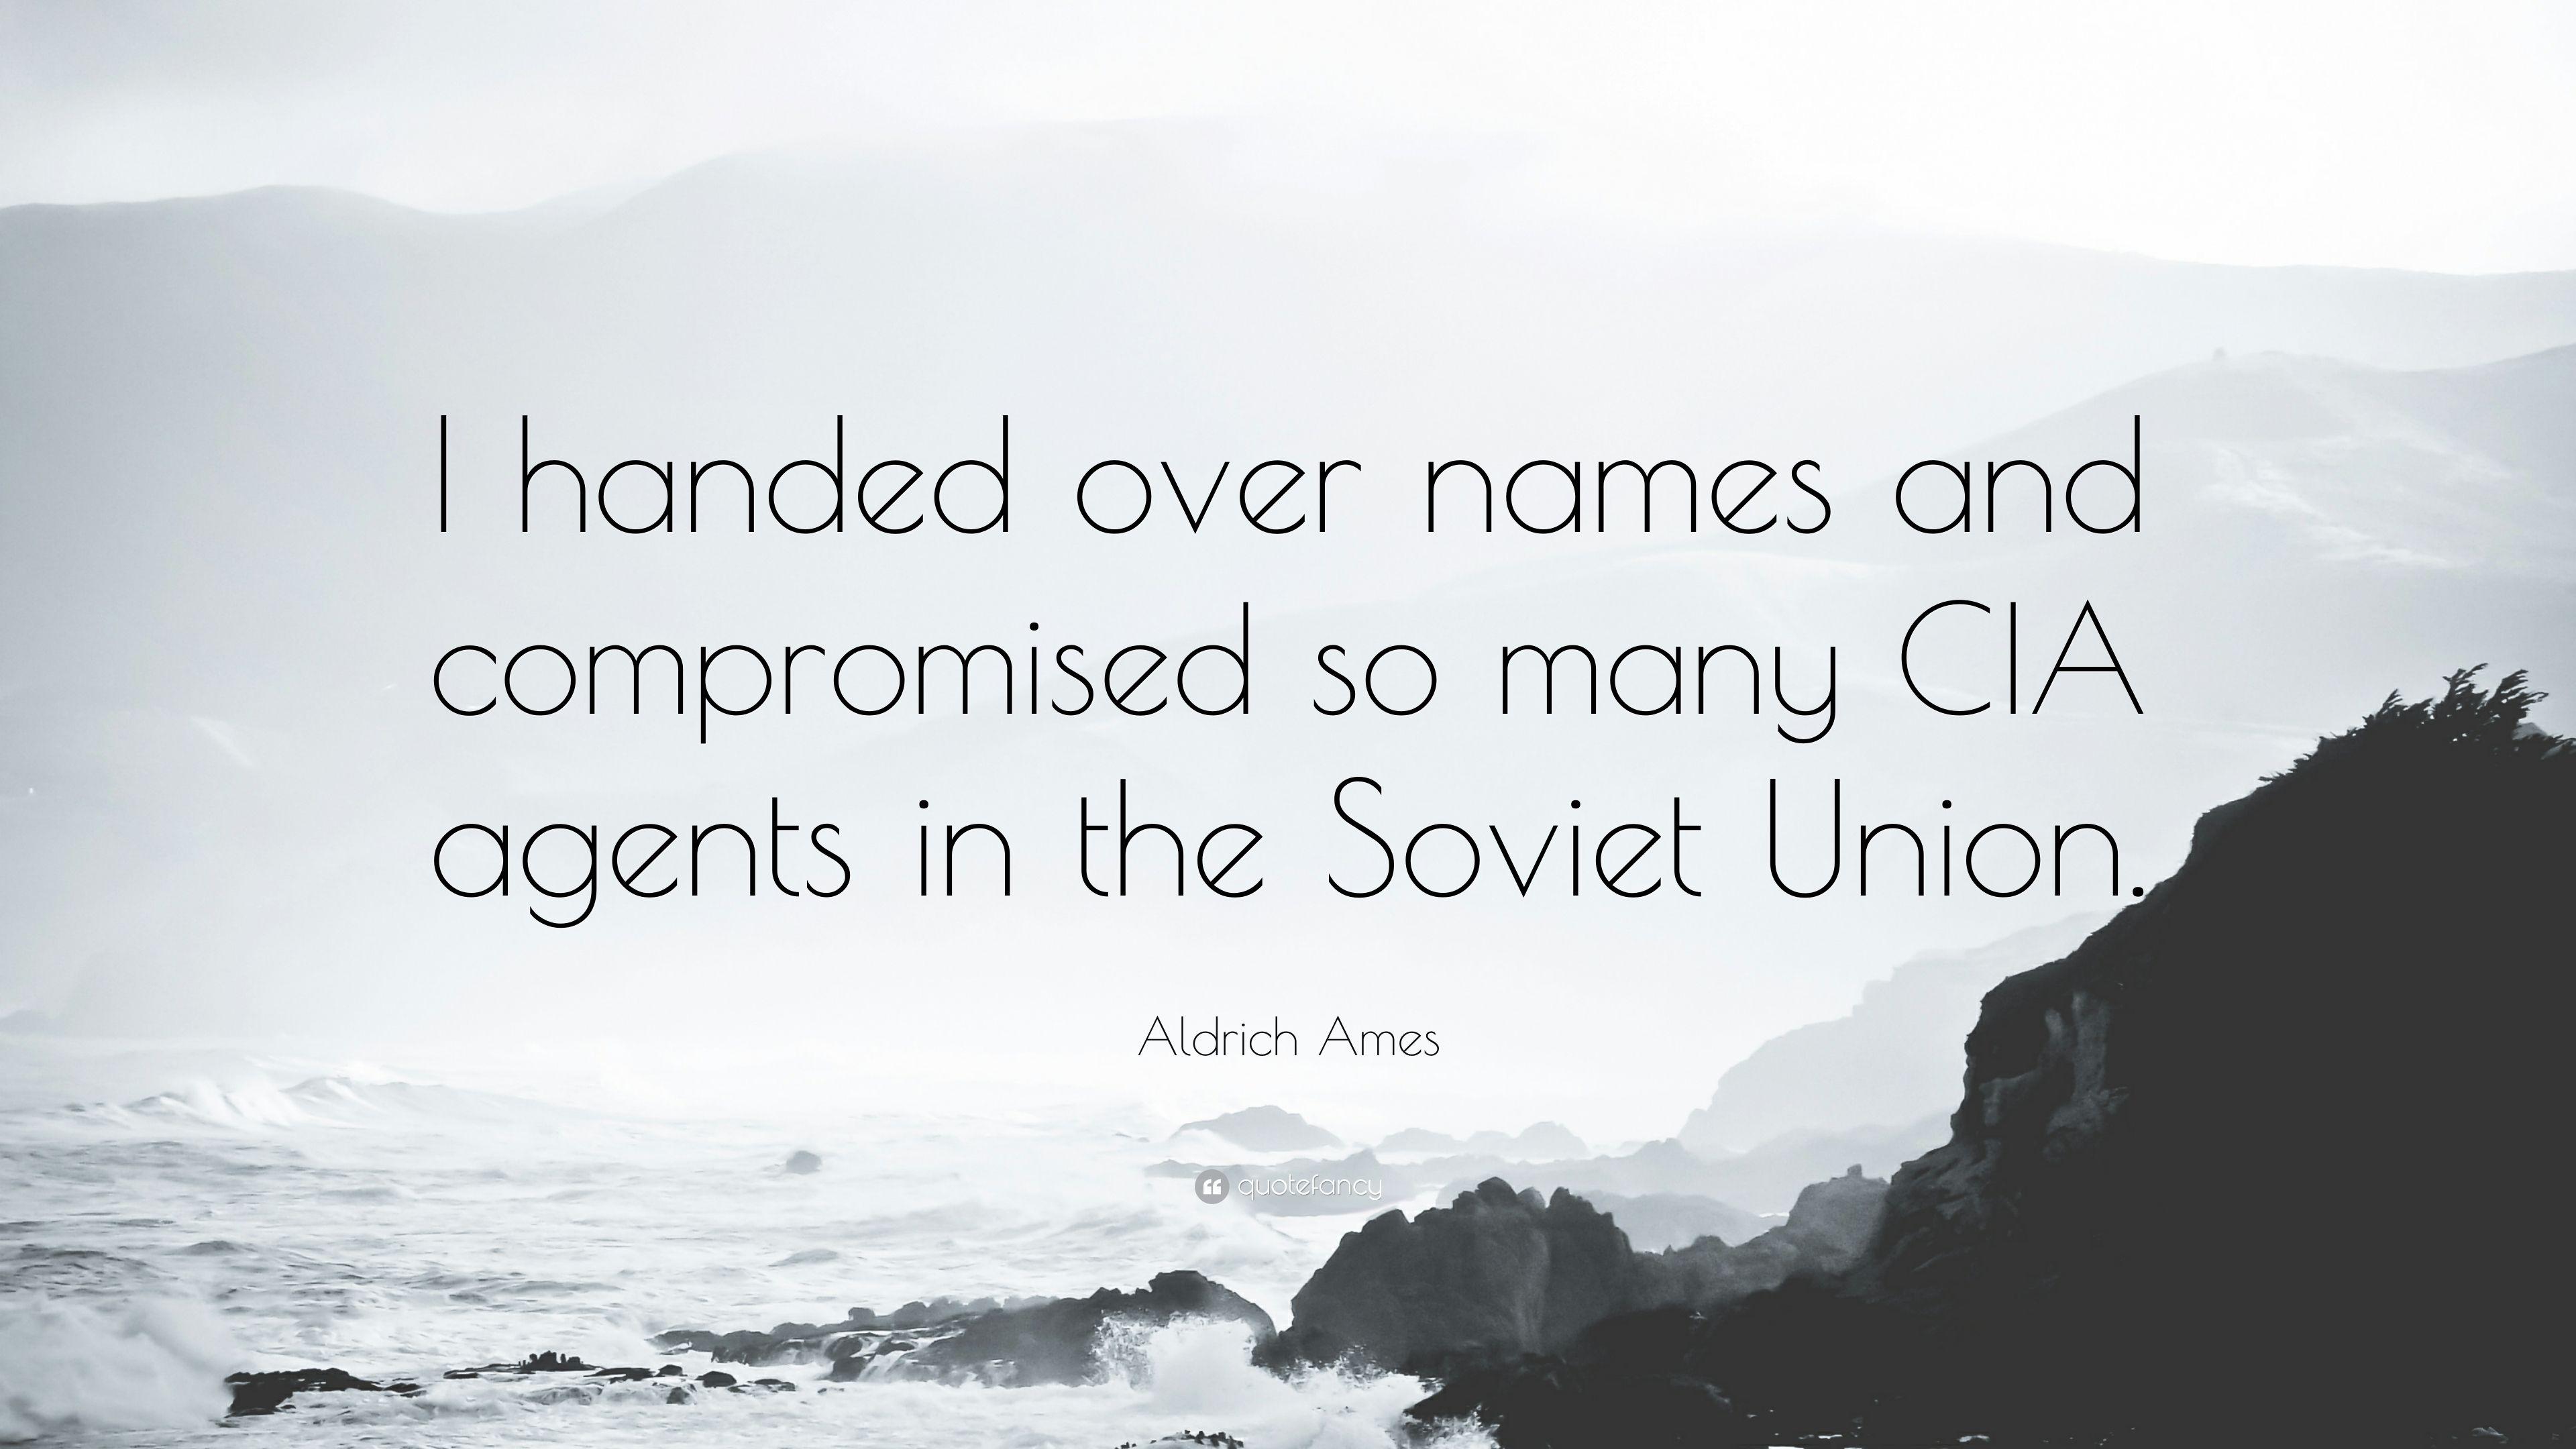 Aldrich Ames Quote: “I handed over names and compromised so